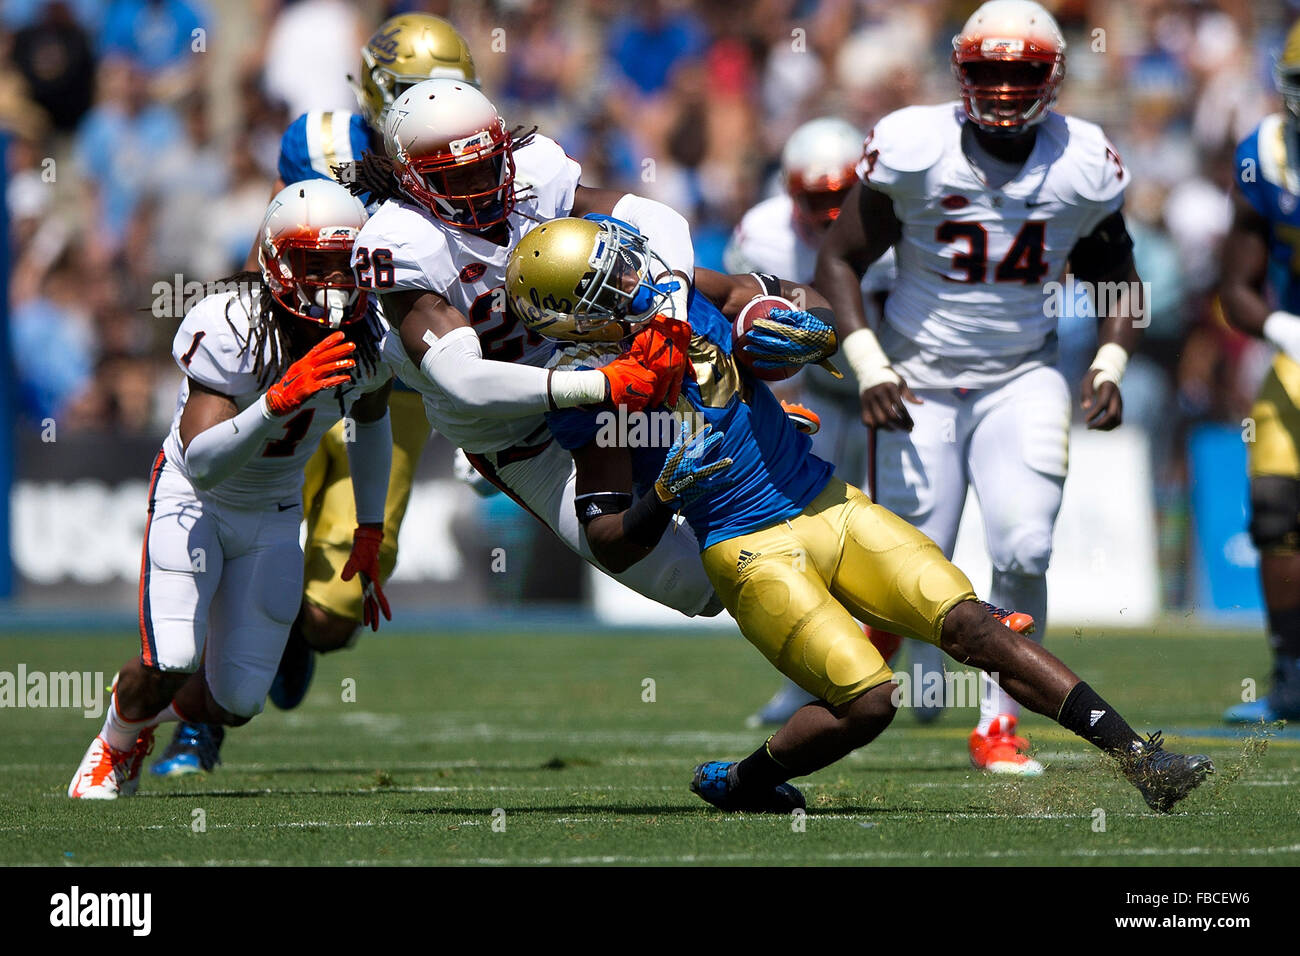 Wide receiver Mossi Johnson #14 of the UCLA Bruins is tacked by cornerback Maurice Canady #26 of the Virginia Cavaliers during Stock Photo